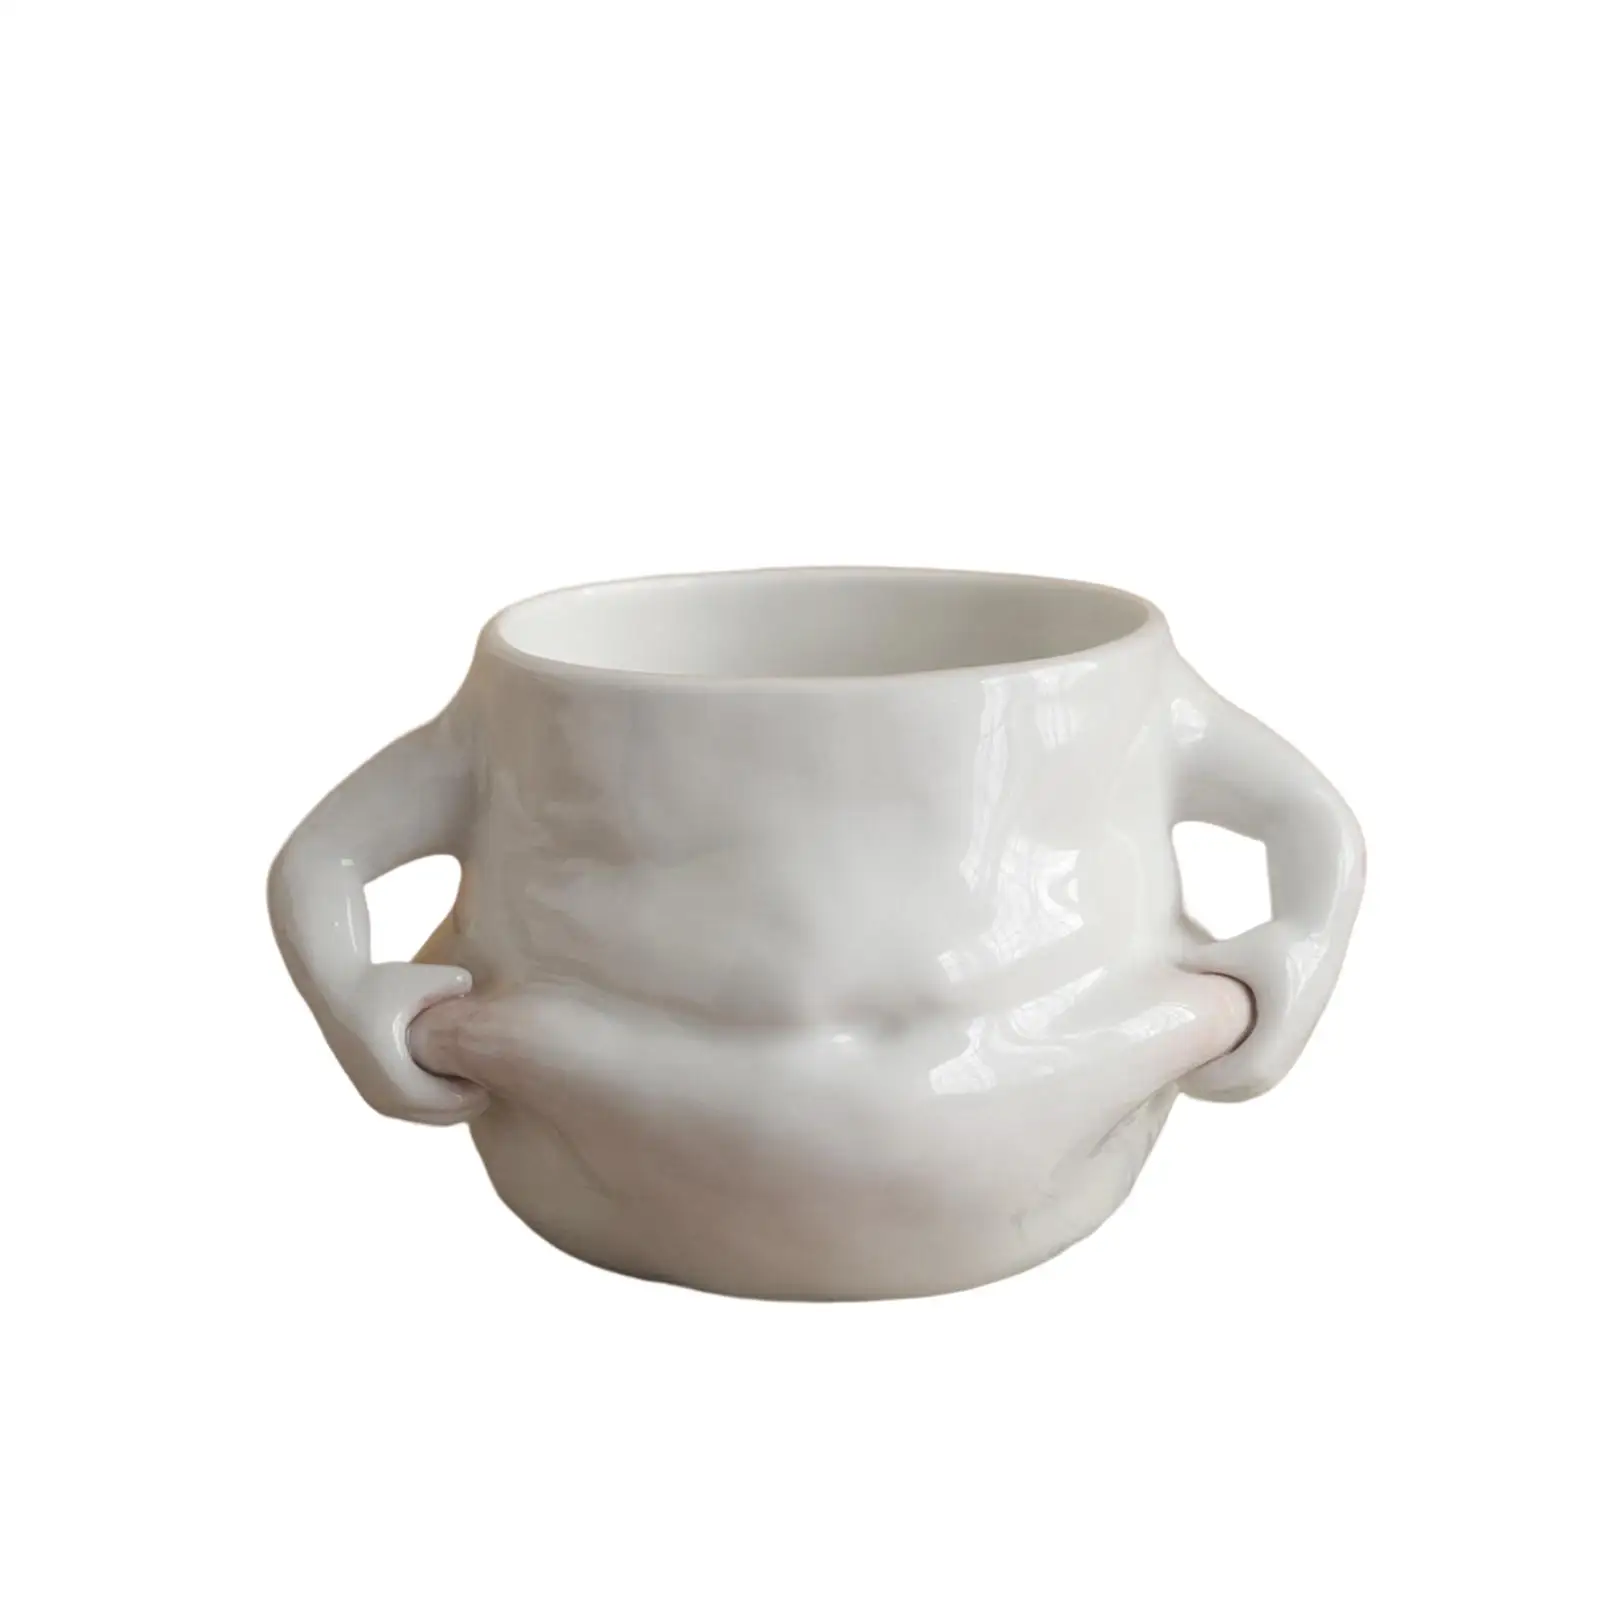 Creative Ceramic Coffee mug Cup Housewarming Gift Novelty white Pinch Belly Funny for pub kitchen